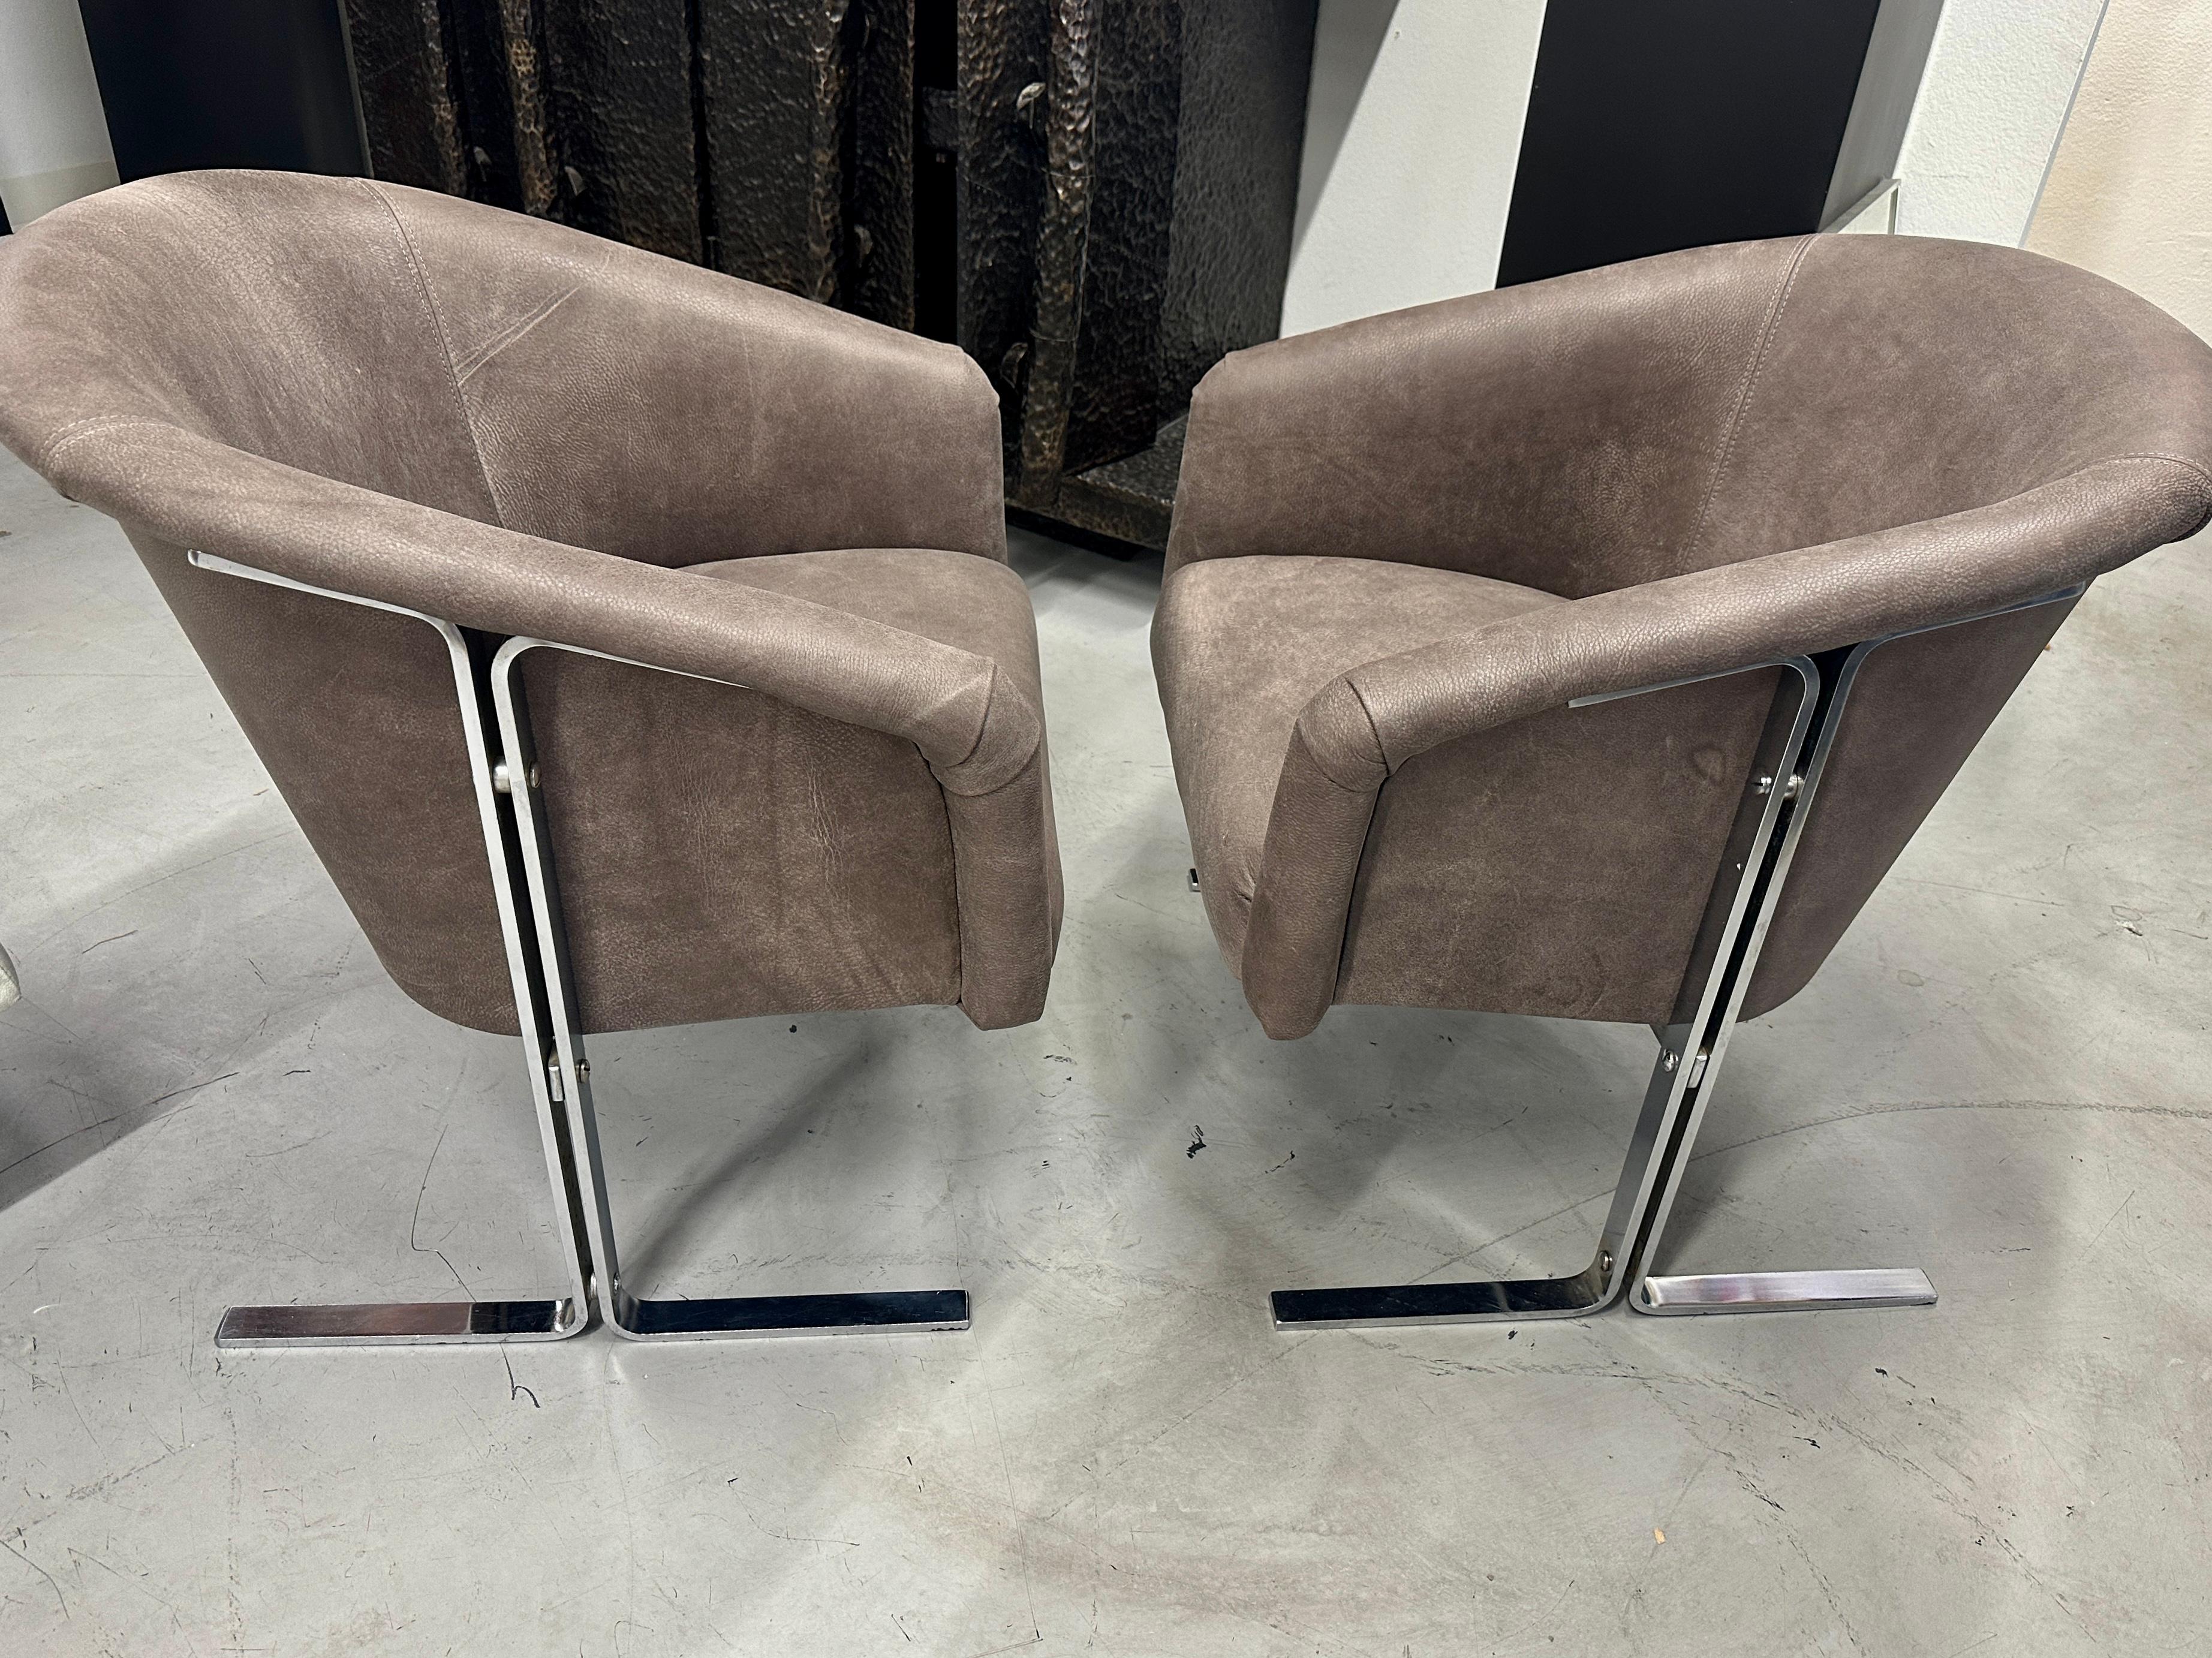 A beautifully re-upholstered chromed steel armchairs. They have been redone in a wonderful distressed heavy leather. Not sure as to the manufacturer but they clearly look to be influence by Milo Baughman designs. The distressed leather has a